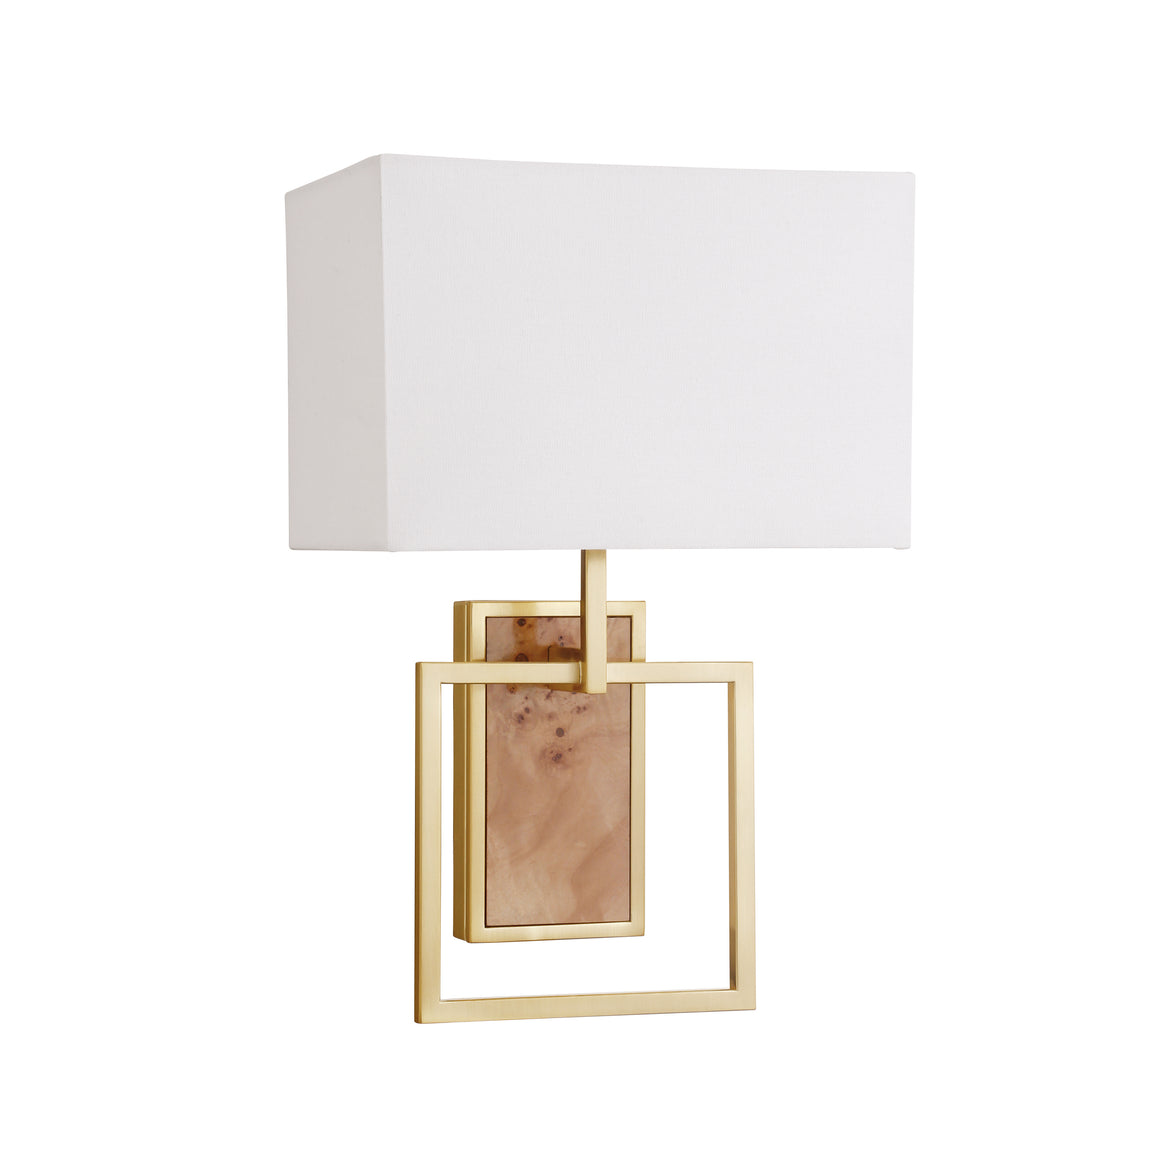 Flushmount Sconce with Rectangular Burl Wood Backplate and Open Brushed Brass Square Frame